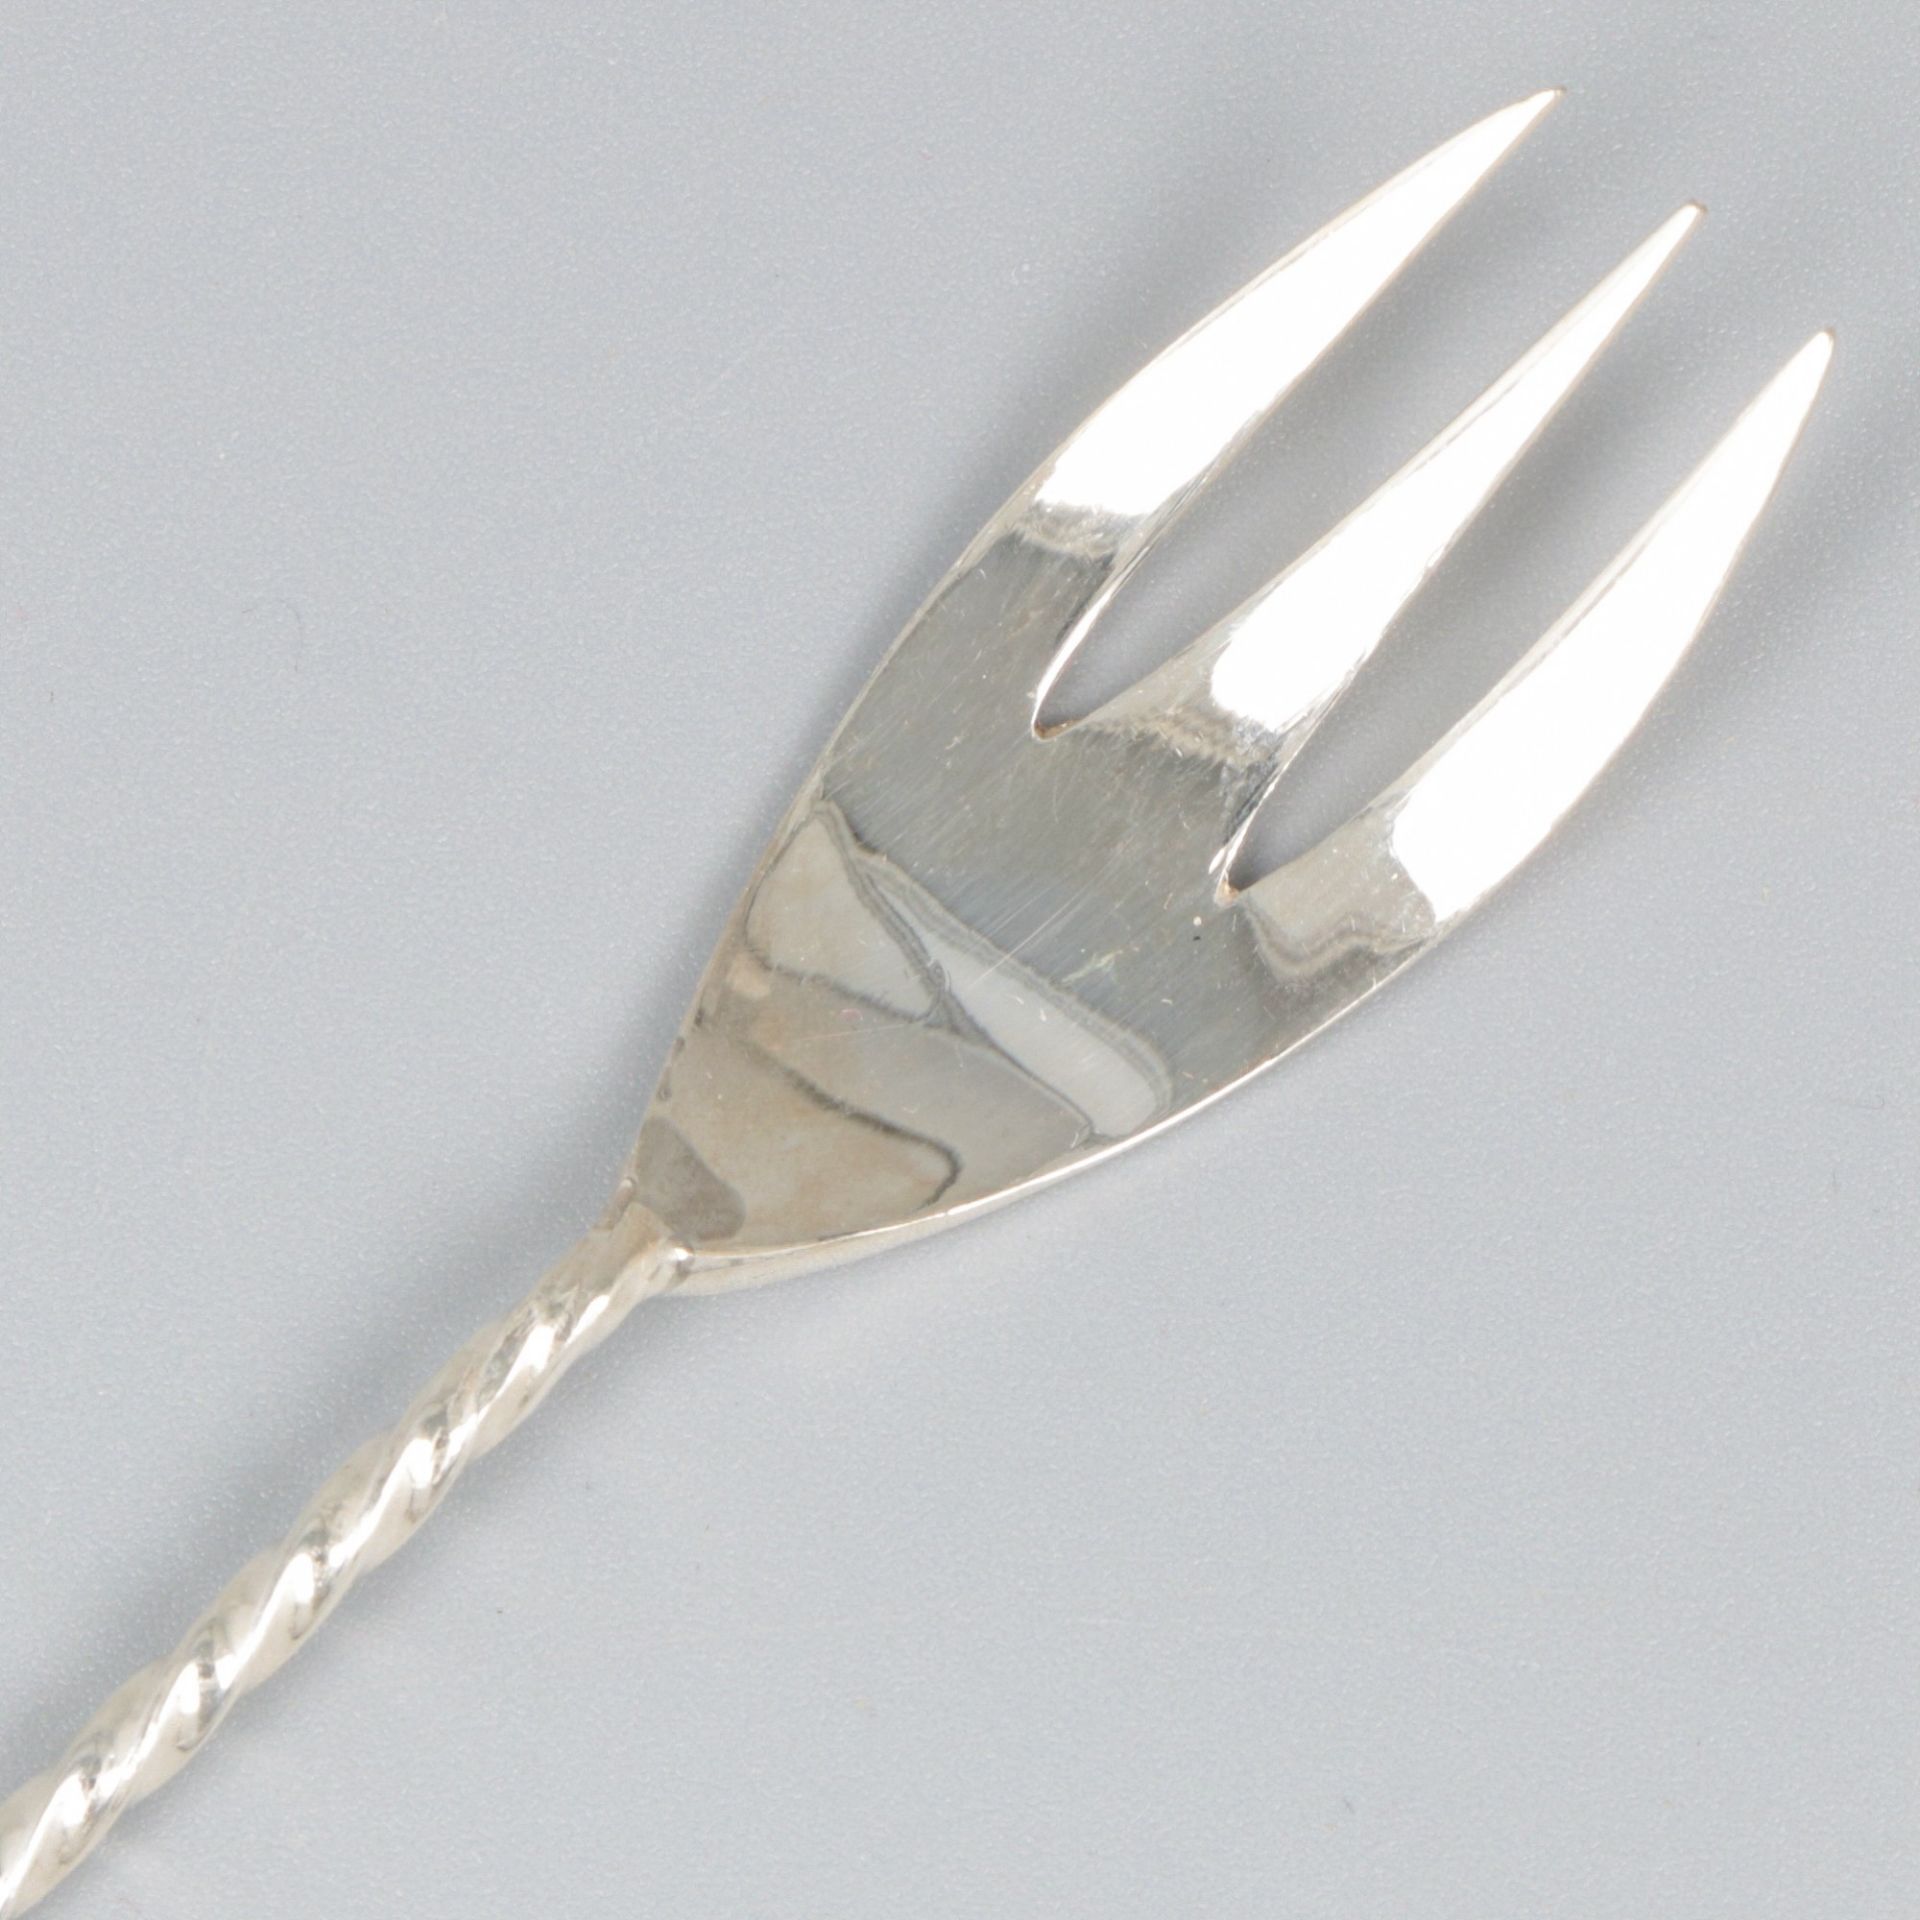 6-piece set of cake / pastry forks silver. - Image 6 of 9